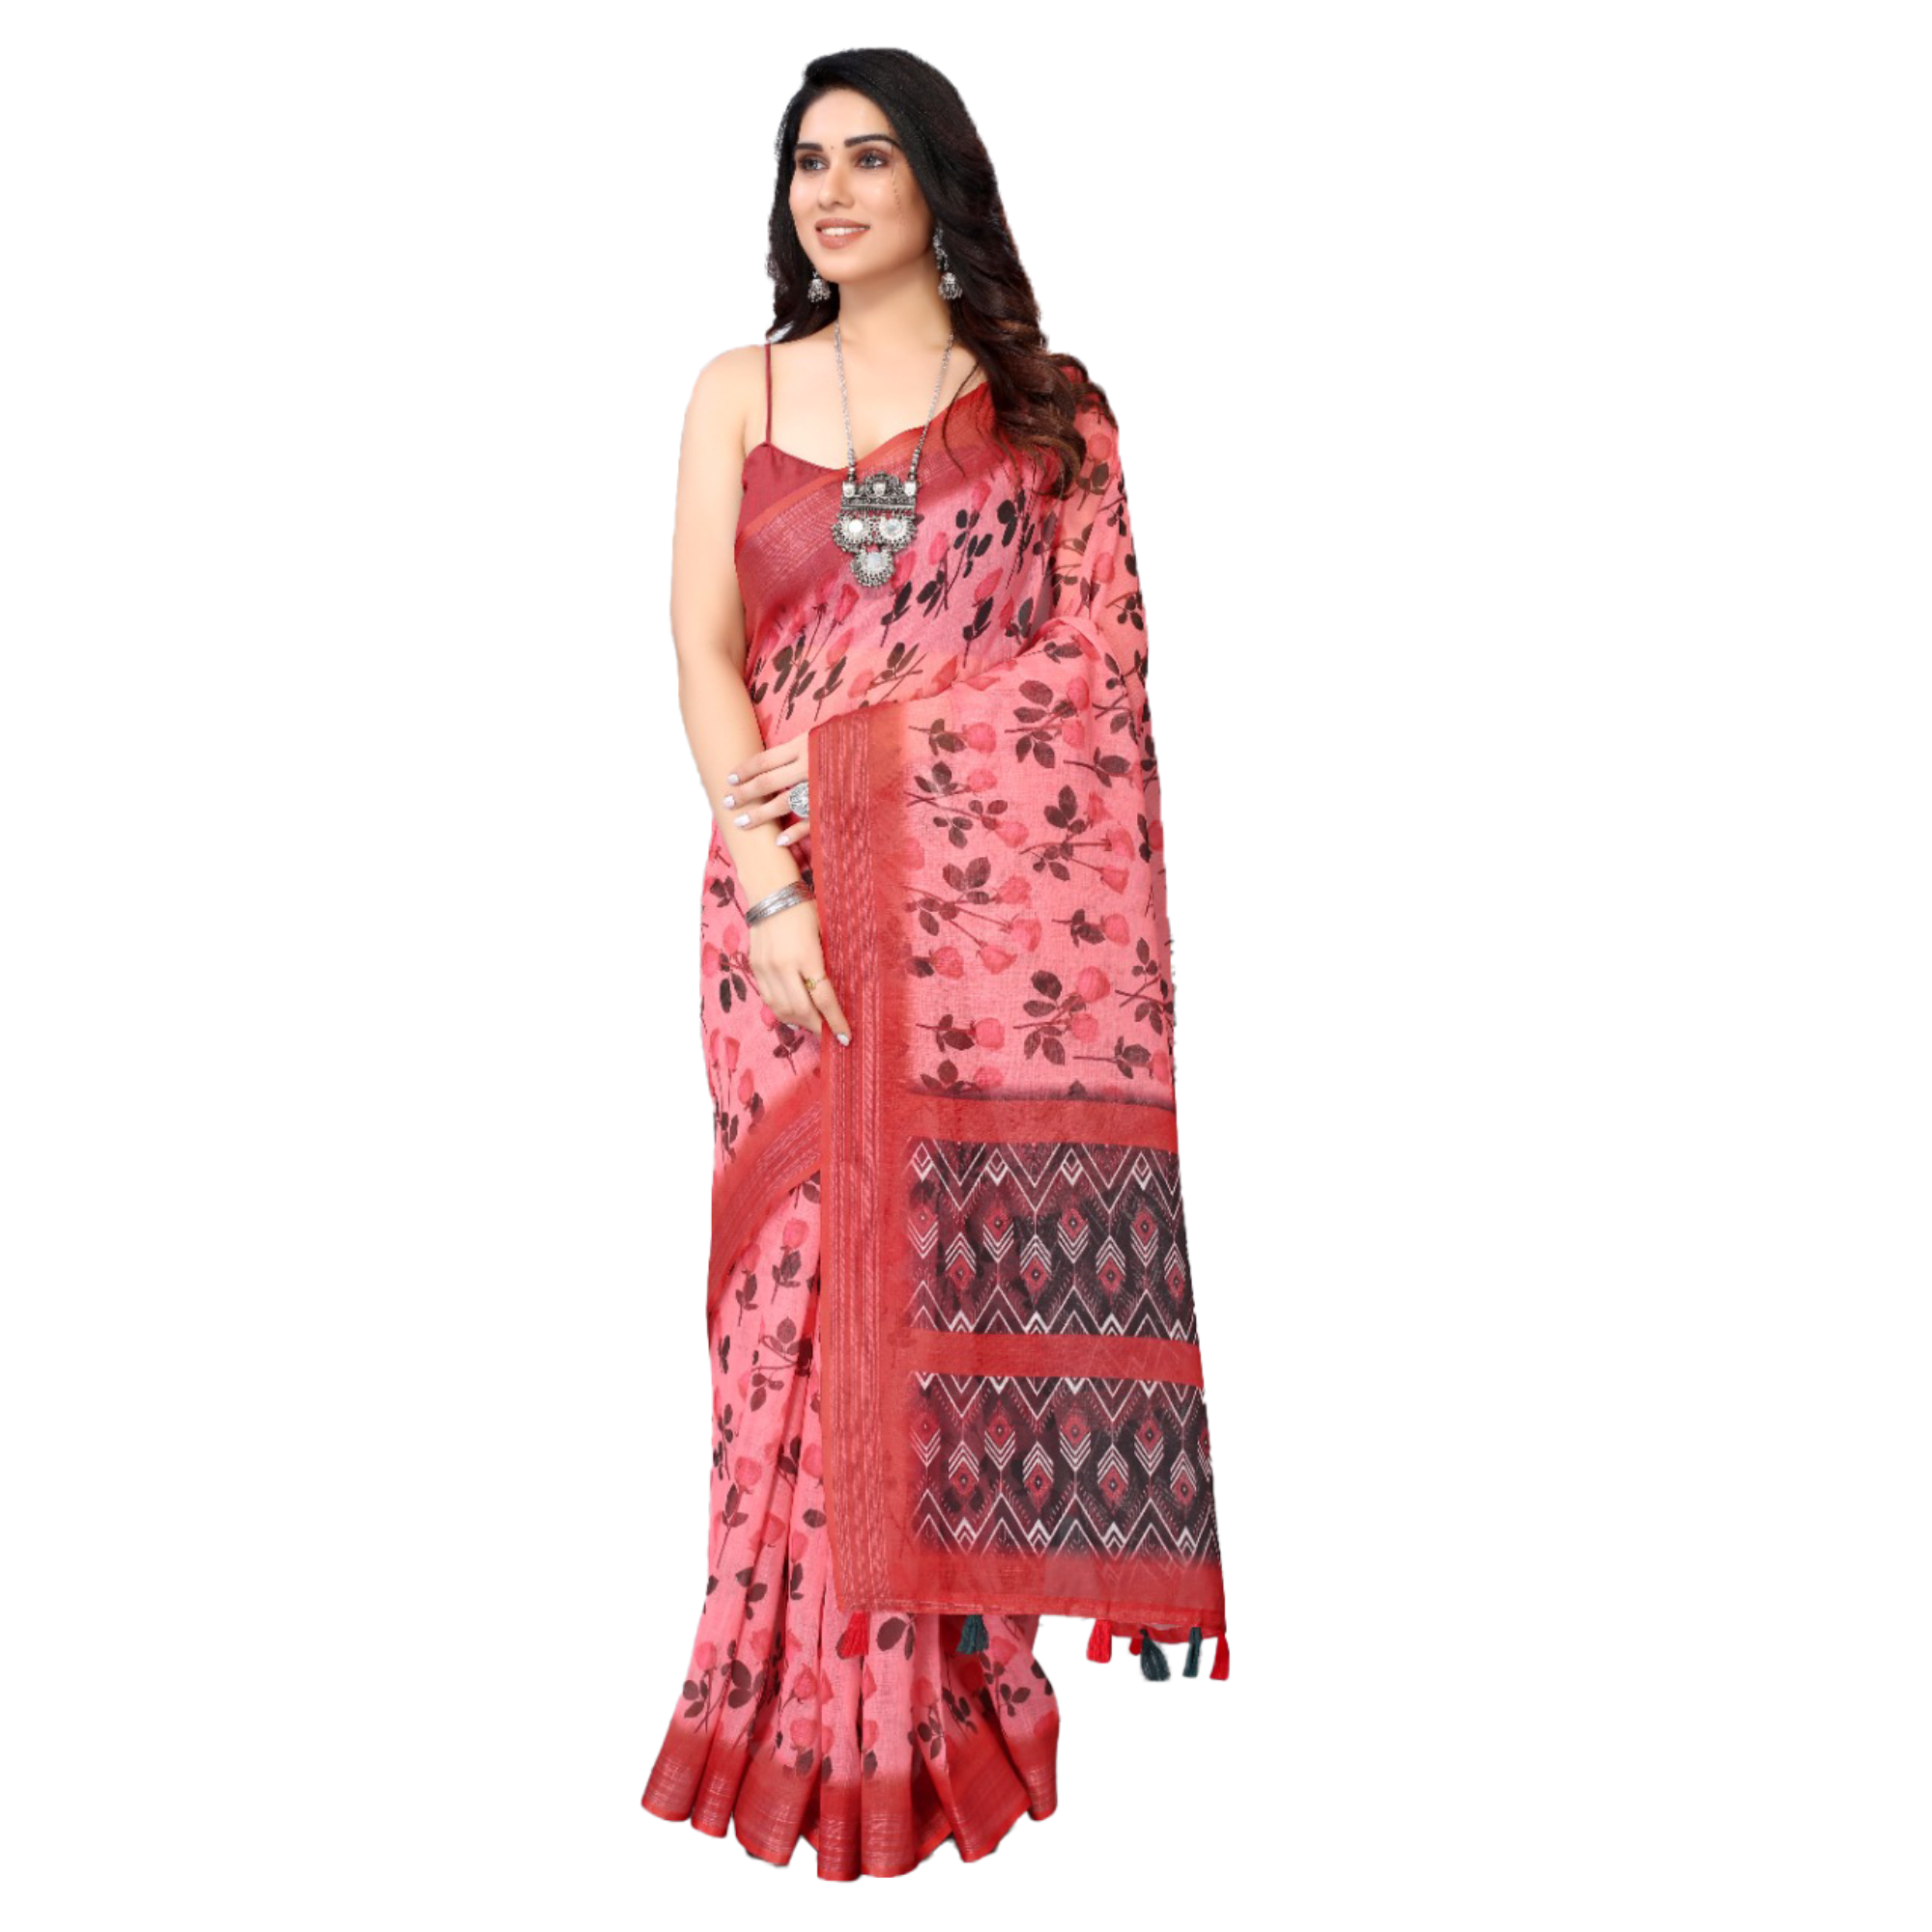 Women's Linen Blue Saree with Red Geometrical Design with purple border and contrast Red Pallu - TheHangr